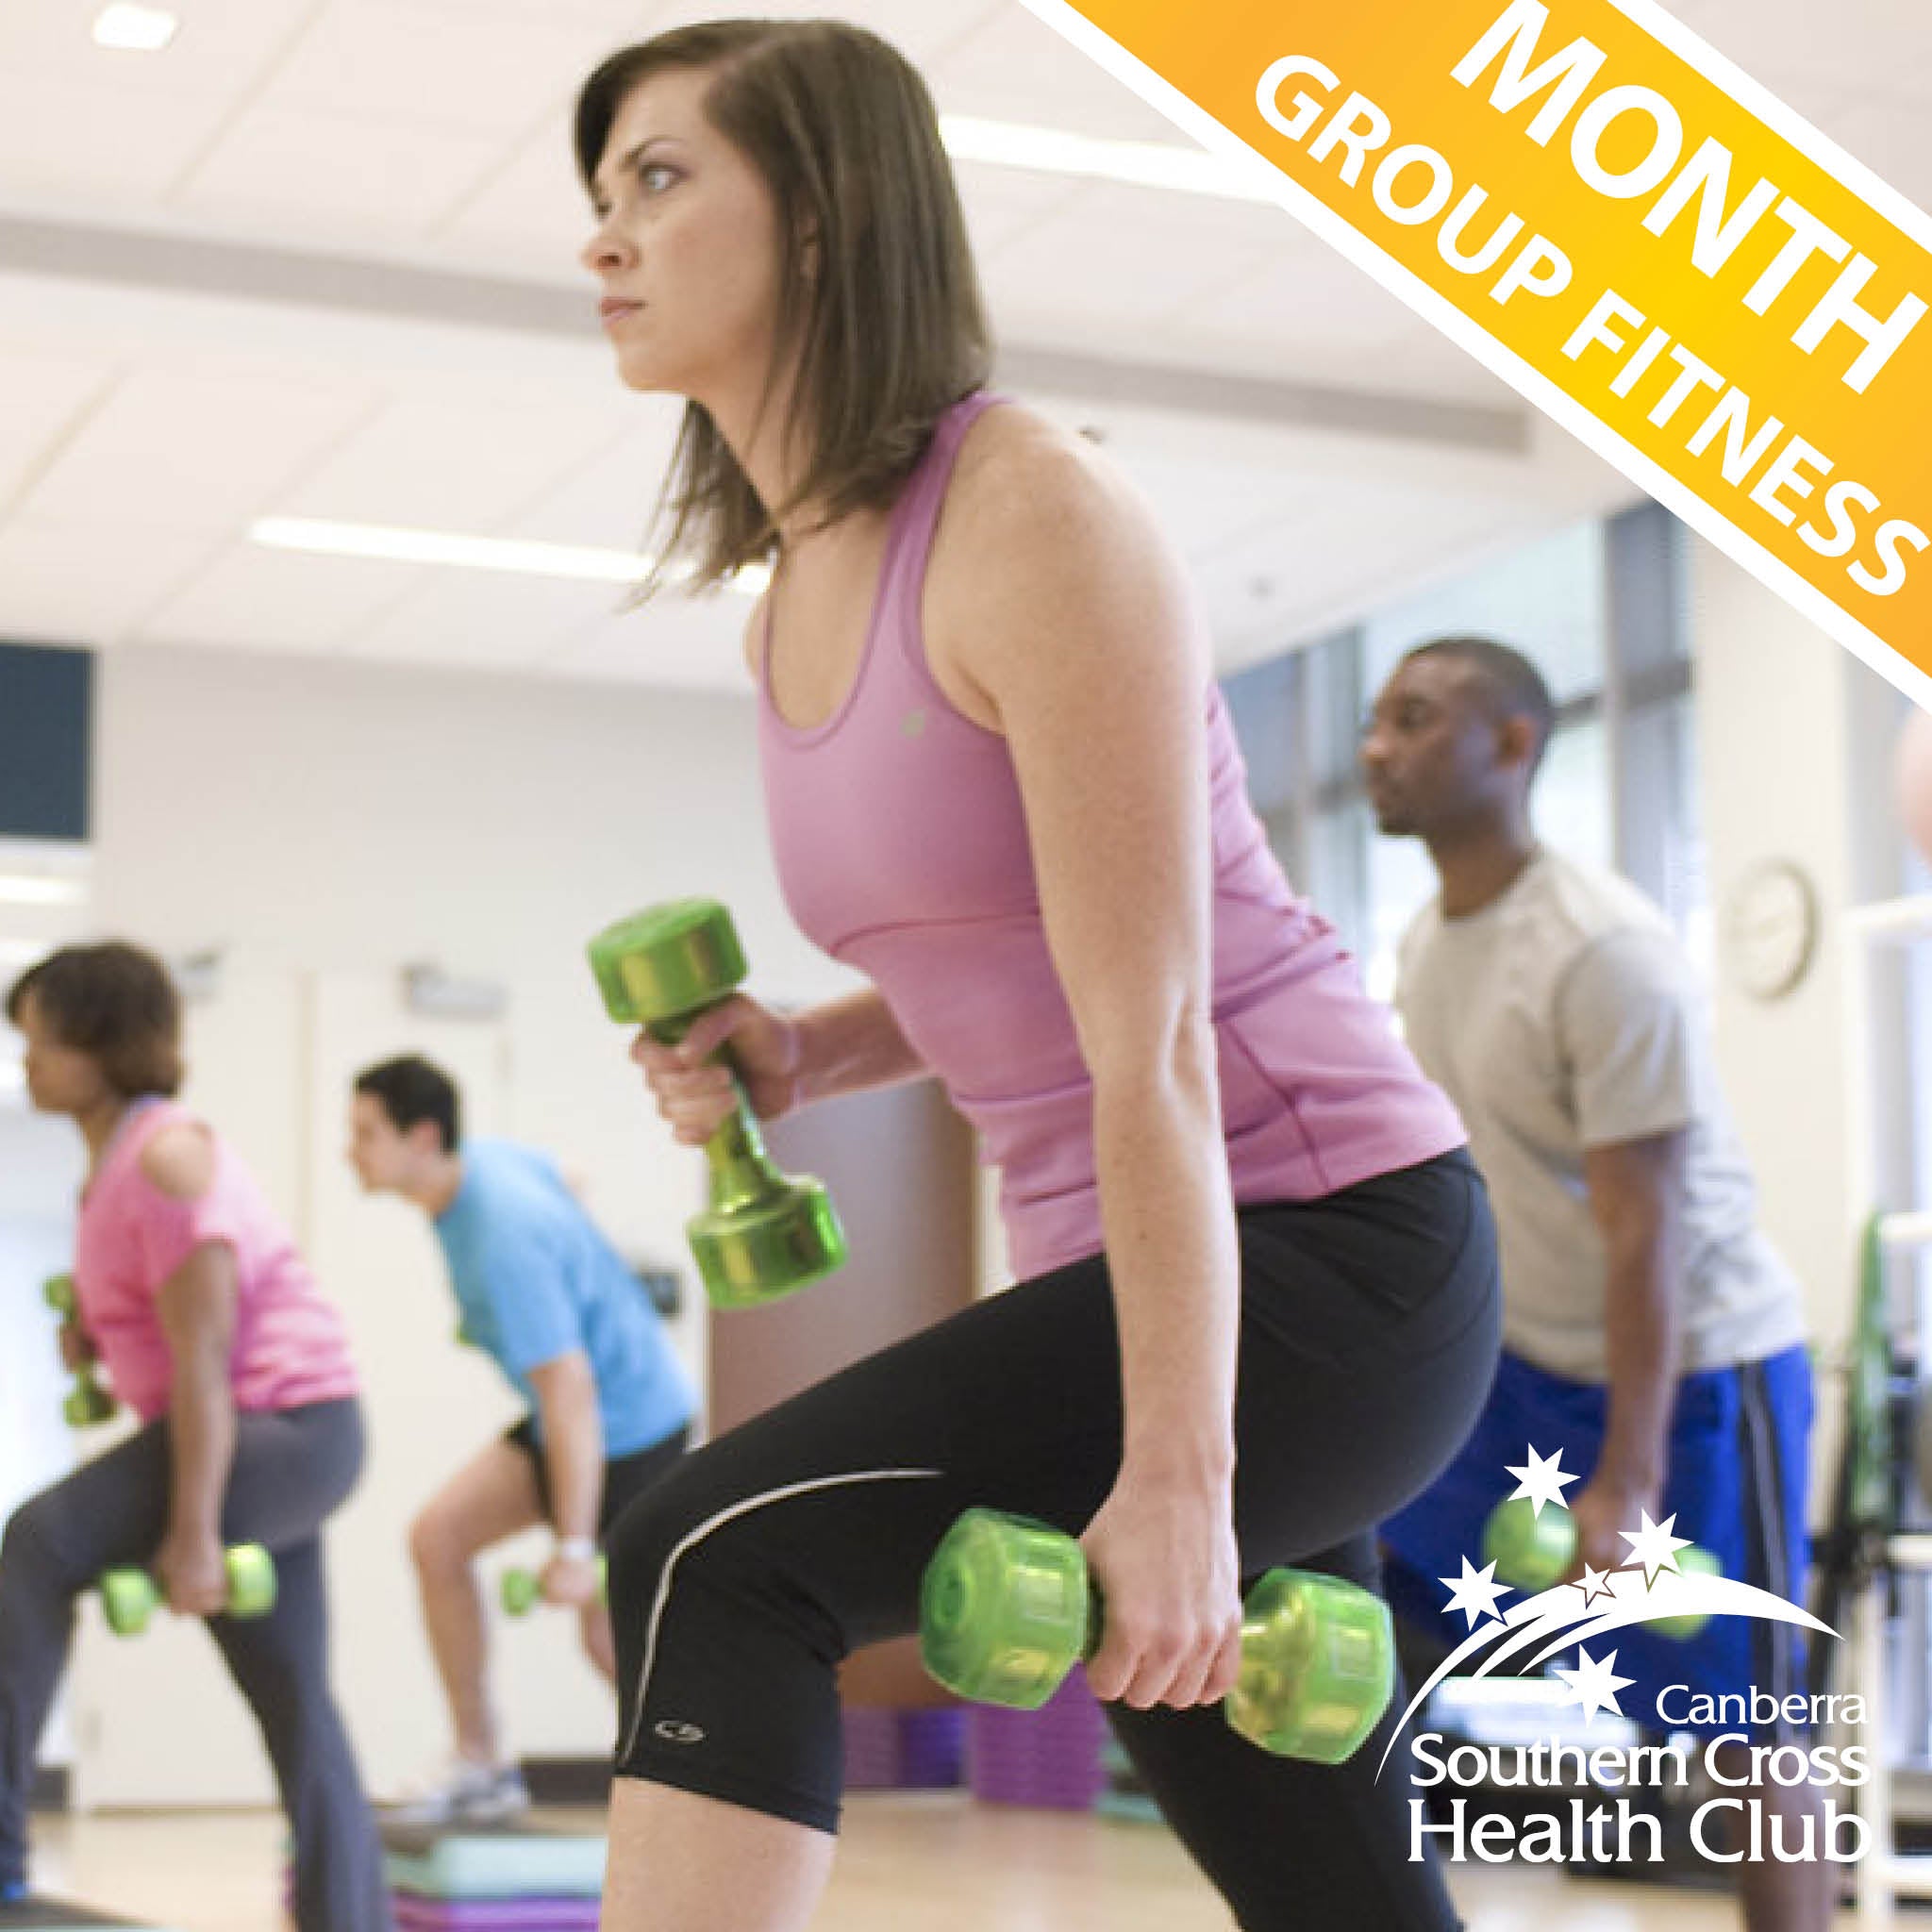 Group Fitness Membership - One Month (3,500 StarRewards points)